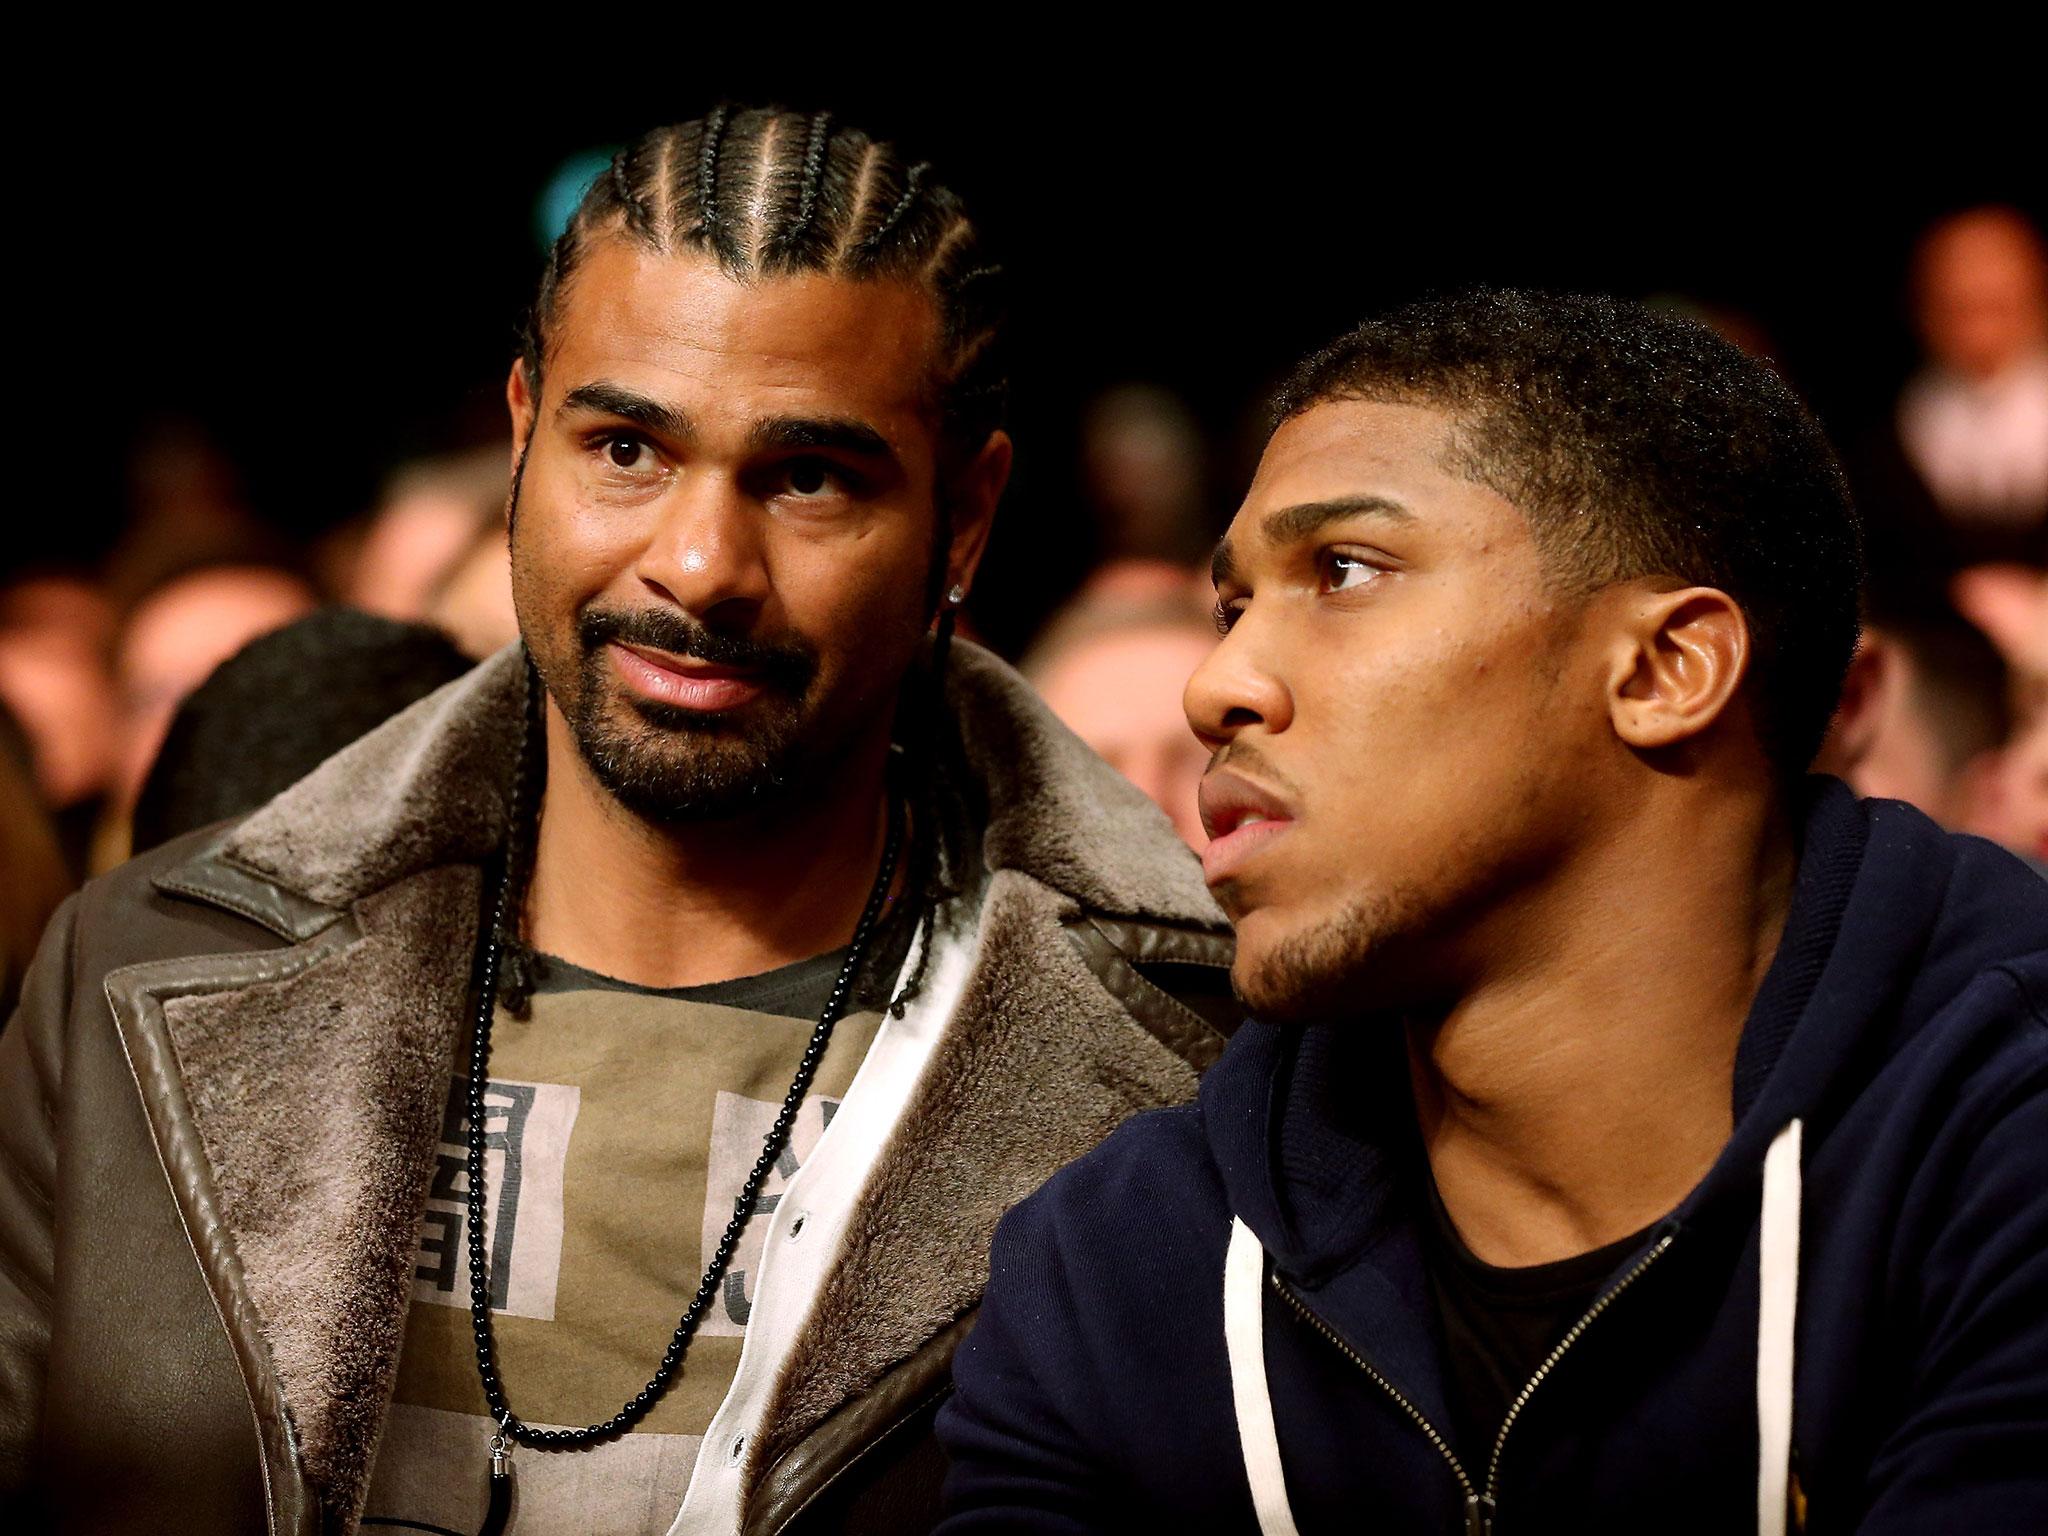 Anthony Joshua wants to see Tony Bellew 'put a sock in David Haye's mouth'